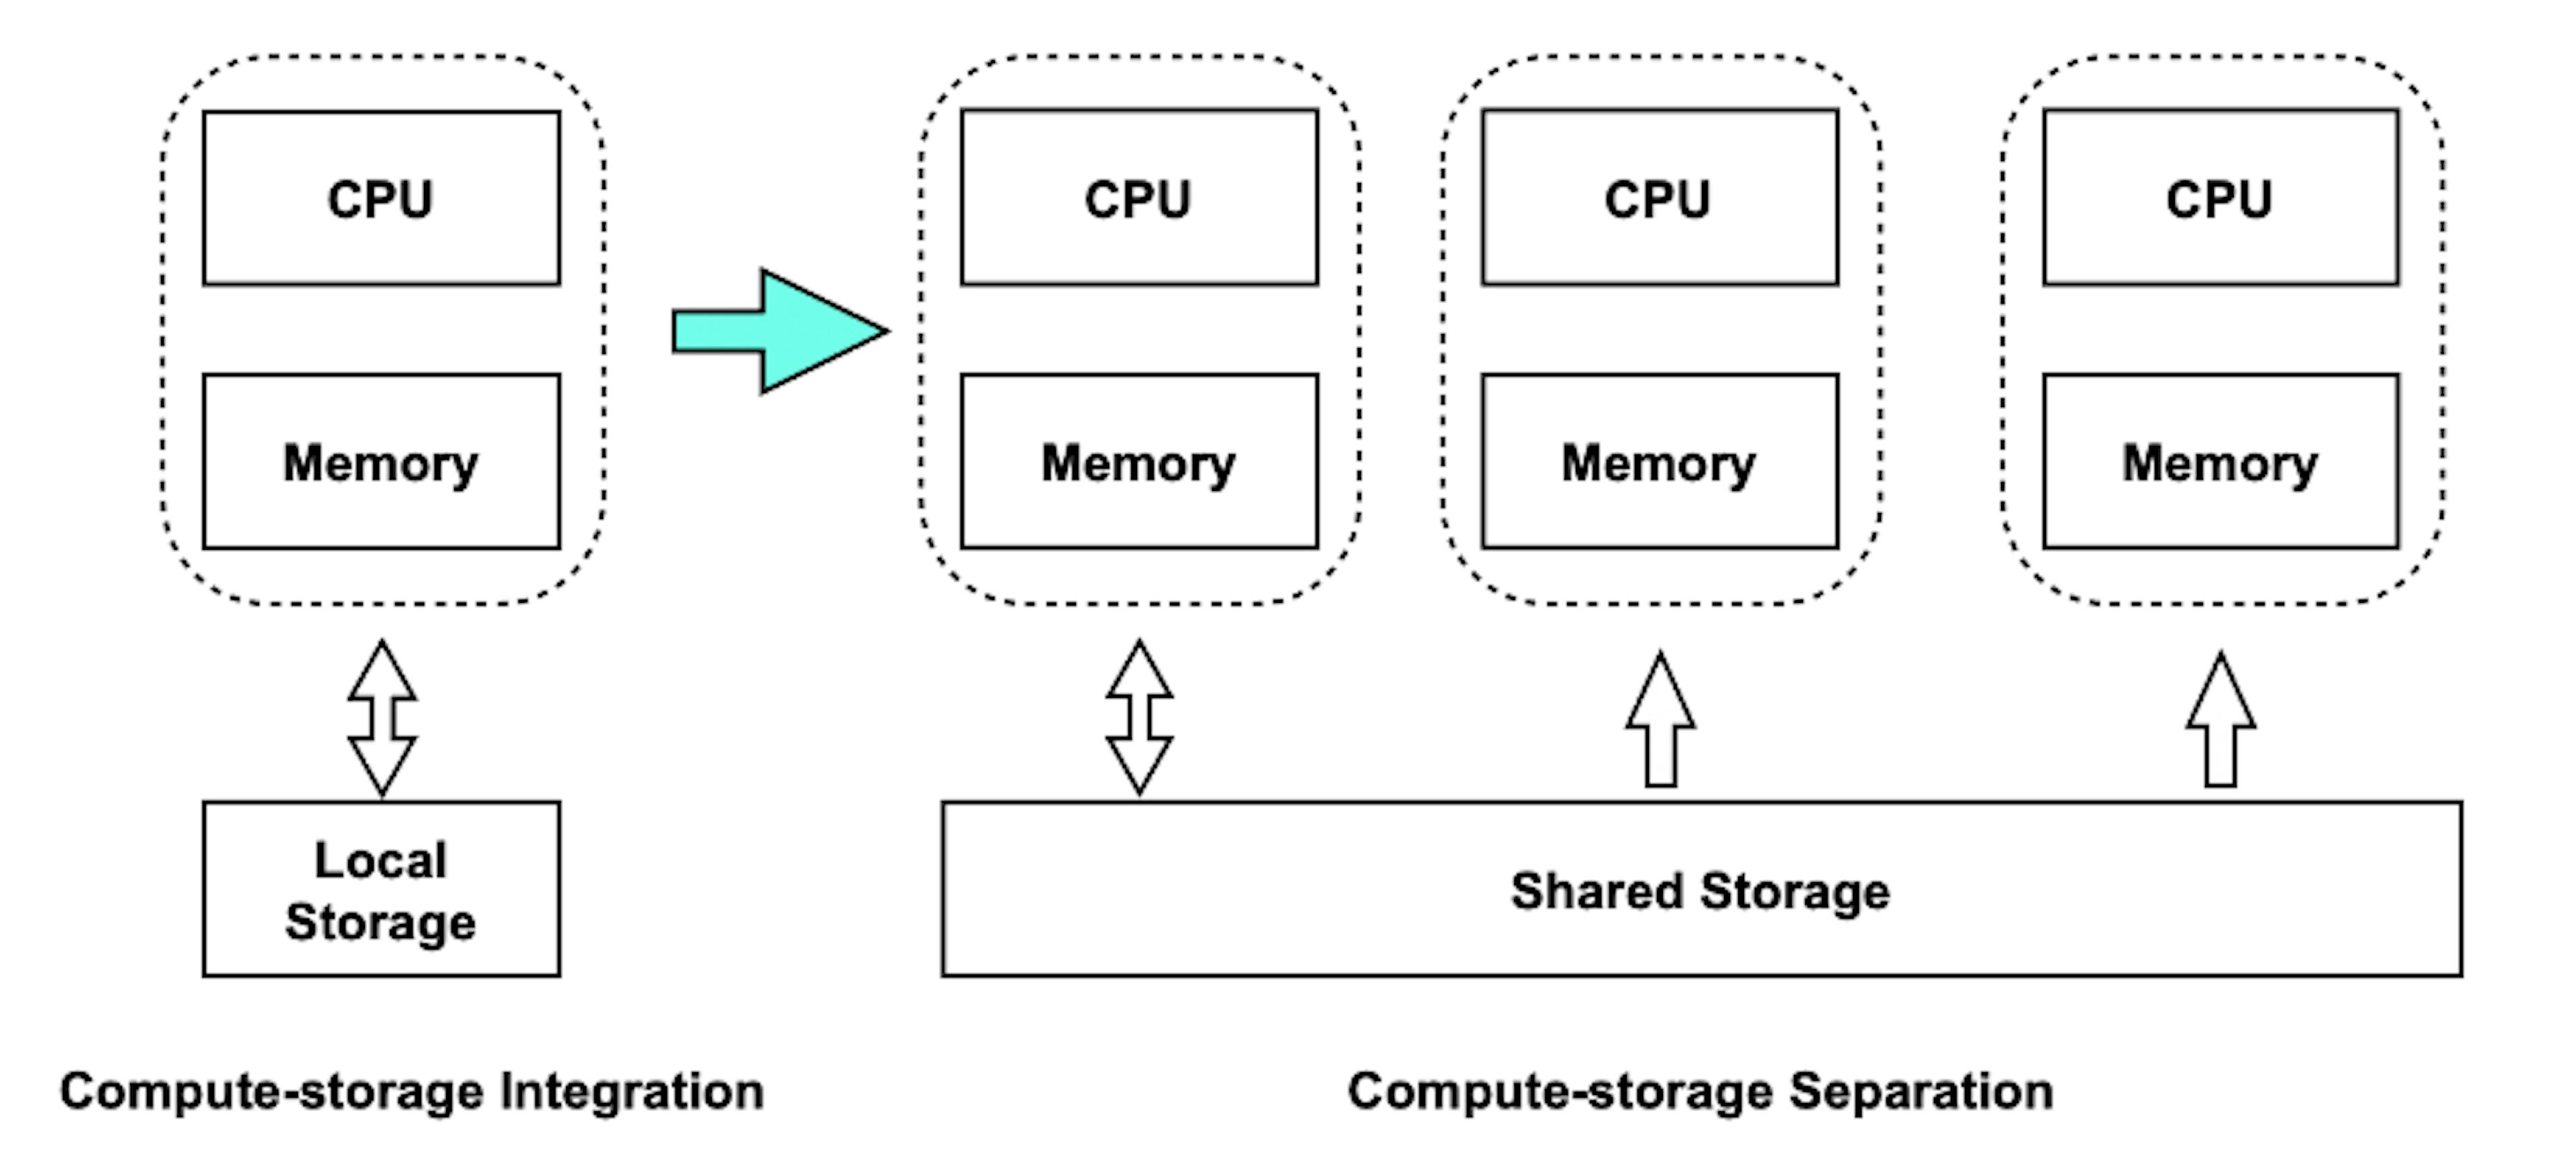 how does compute-storage separation look like